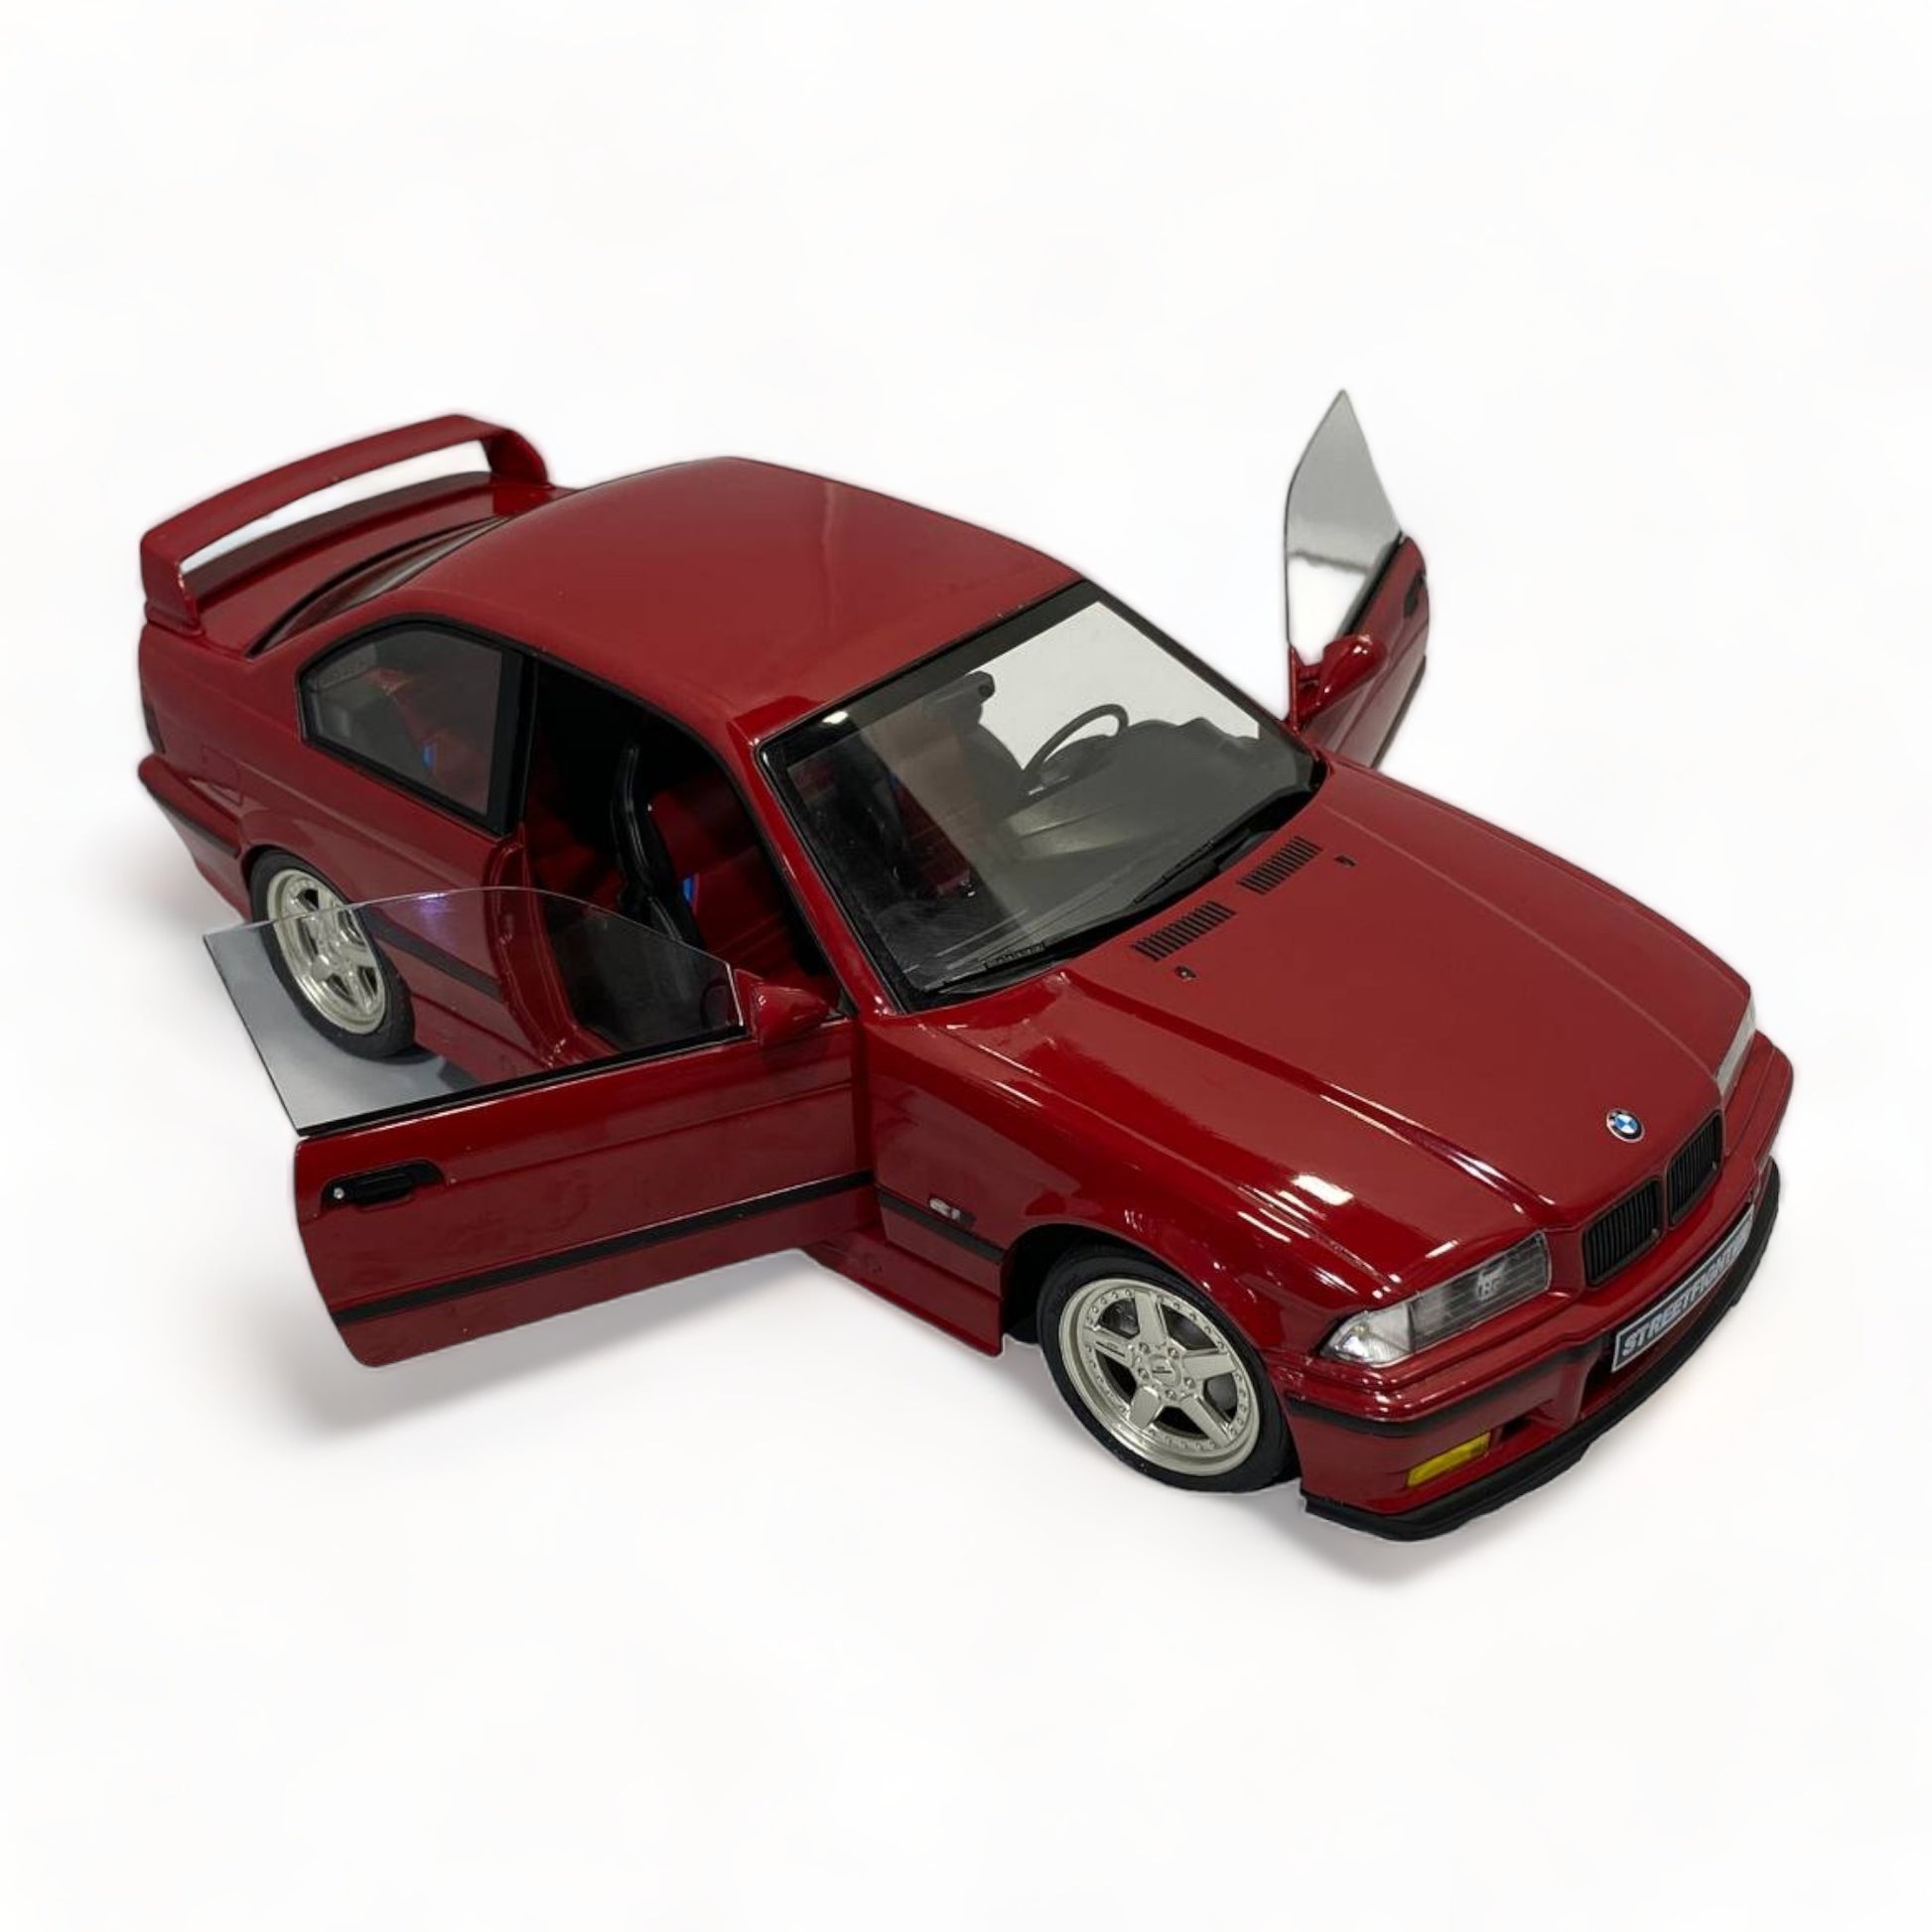 1/18 Diecast BMW M3 E36 Coupe street fighter Red by Solido Model Car|Sold in Dturman.com Dubai UAE.